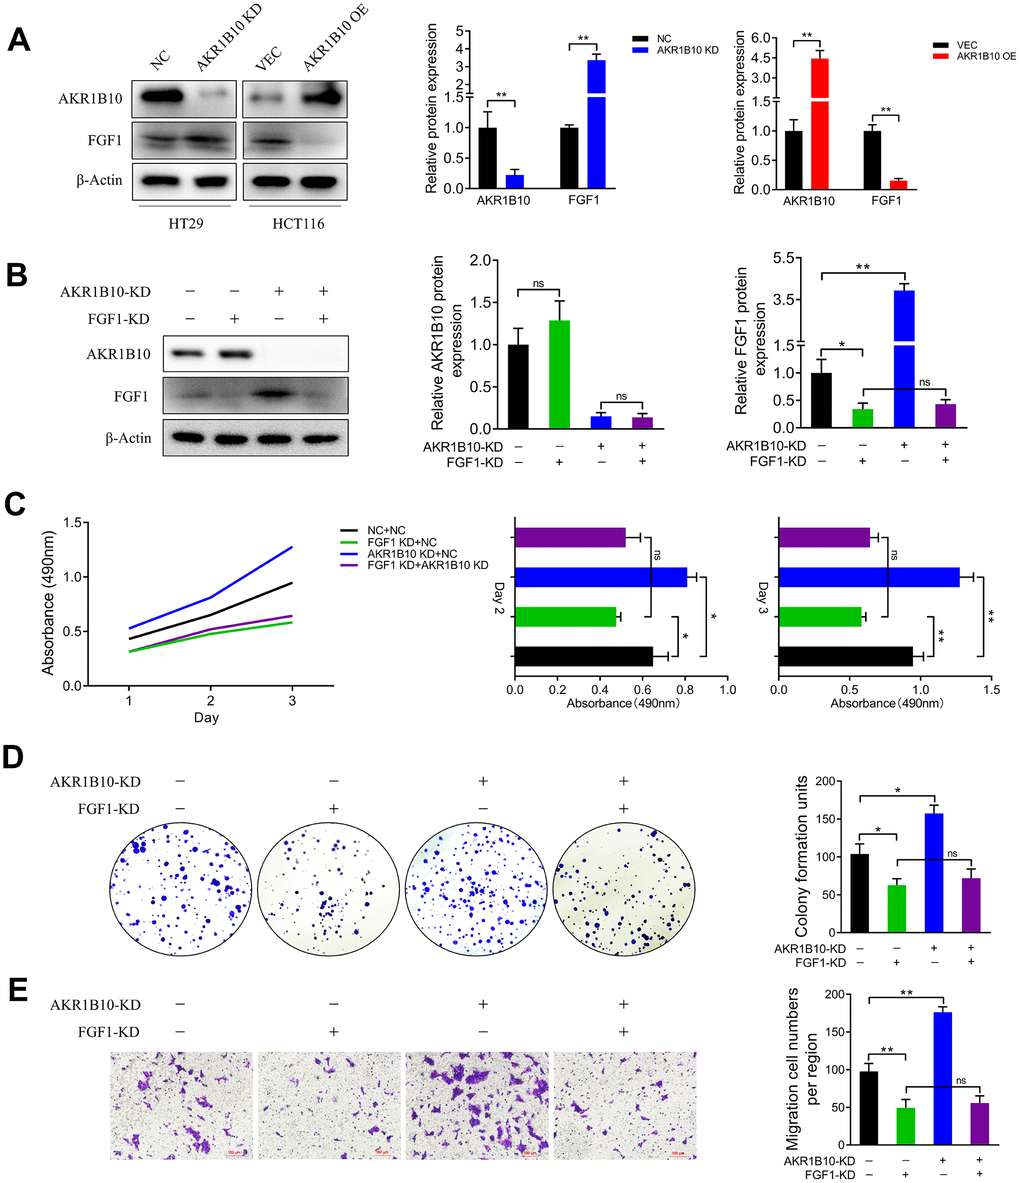 AKR1B10 inhibits CRC cell growth in an FGF1-dependent manner. (A) Immunoblot showing AKR1B10, FGF1 and GAPDH protein levels in HT29 cells transfected with AKR1B10-shRNA and in HCT116 cells transfected with AKR1B10 overexpression plasmid. (B) Immunoblot showing AKR1B10, FGF1 and GAPDH protein levels in HT29 transfected with FGF1-shRNA alone or in combination with AKR1B10-shRNA. (C–E) Proliferation rates (C), colony forming capacity (D) and migration rates (E) of the HT29 cells transfected as above. Data are presented as mean ± SD. NC, negative control; KD, AKR1B10-shRNA; VEC, vector; OE, AKR1B10 overexpression plasmid. “-”, control-shRNA. “+”, AKR1B10 or FGF1 shRNA. *P P P 